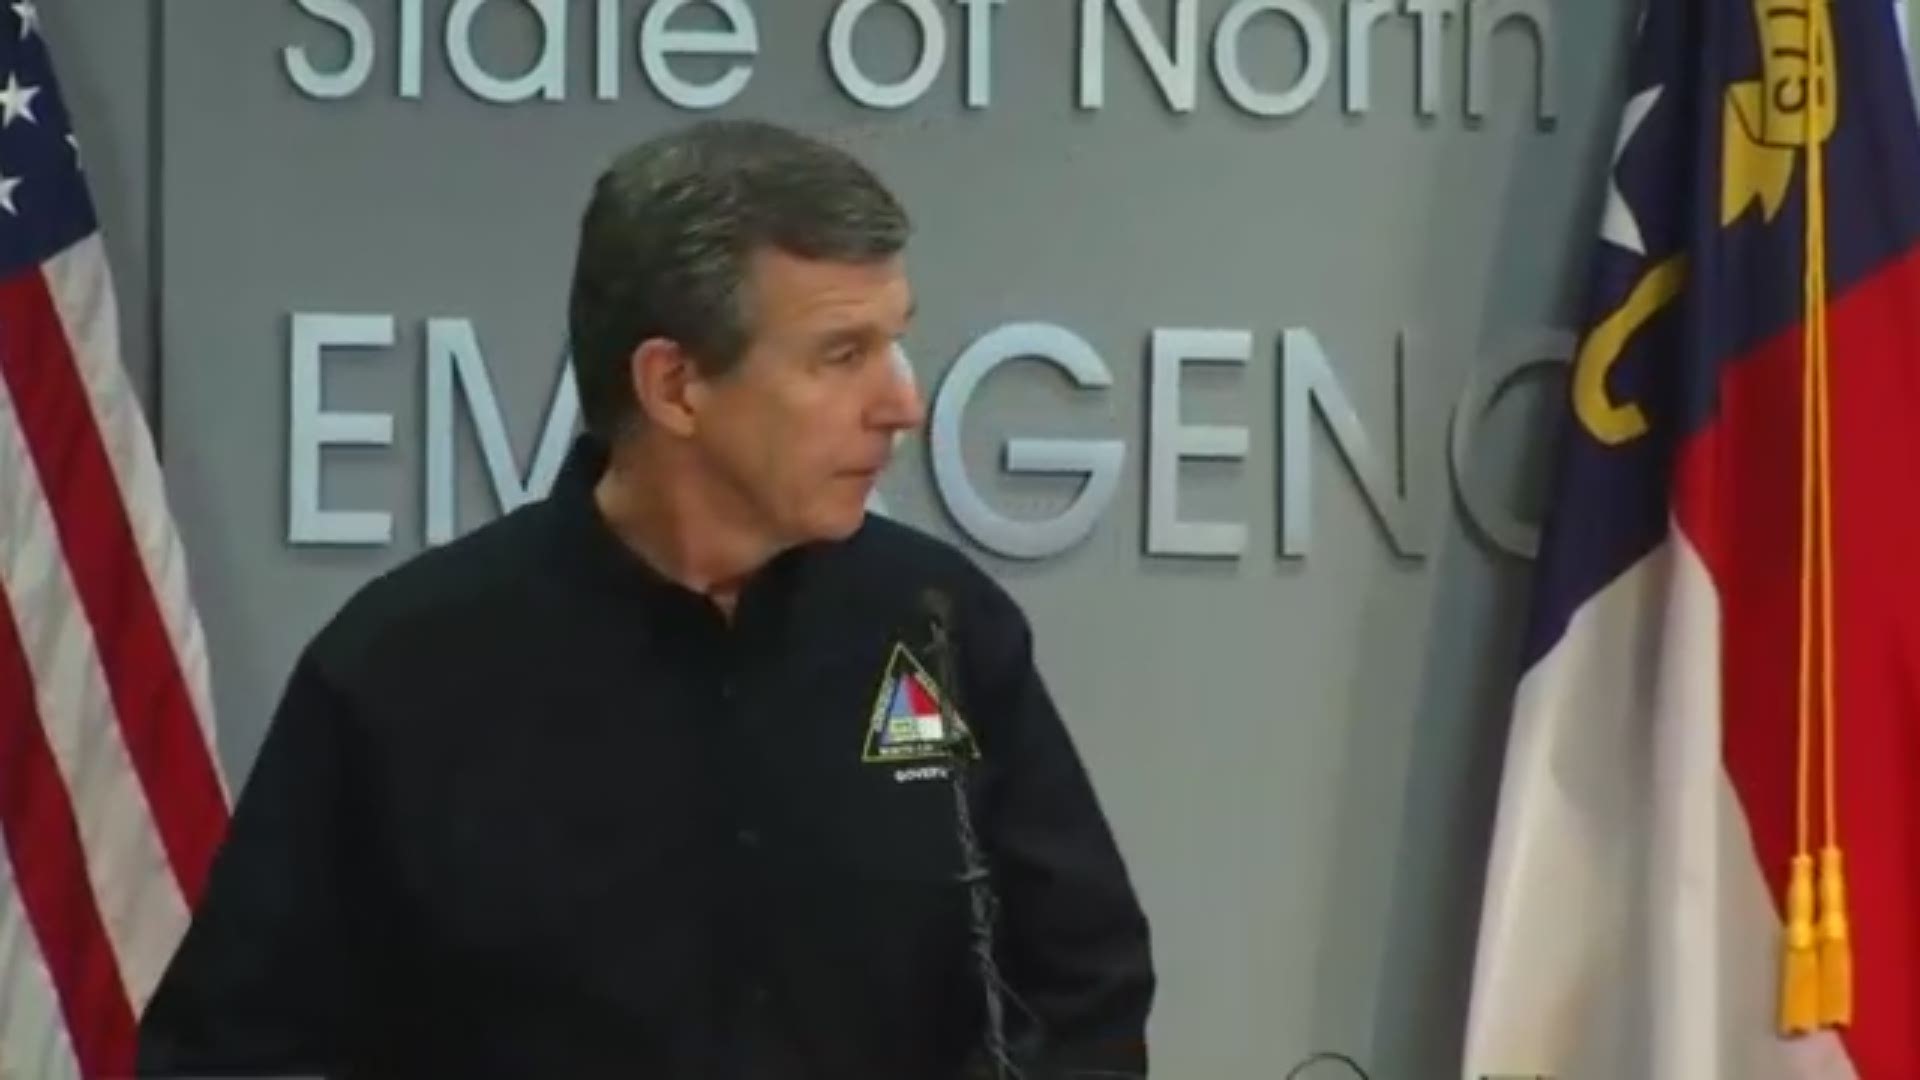 Tuesday North Carolina, Governor Roy Cooper issued a mandatory state evacuation order for vulnerable coastal areas. The state order is in addition to local evacuation orders already in place in most coastal communities. It's the first such an evacuation order in the state's history.